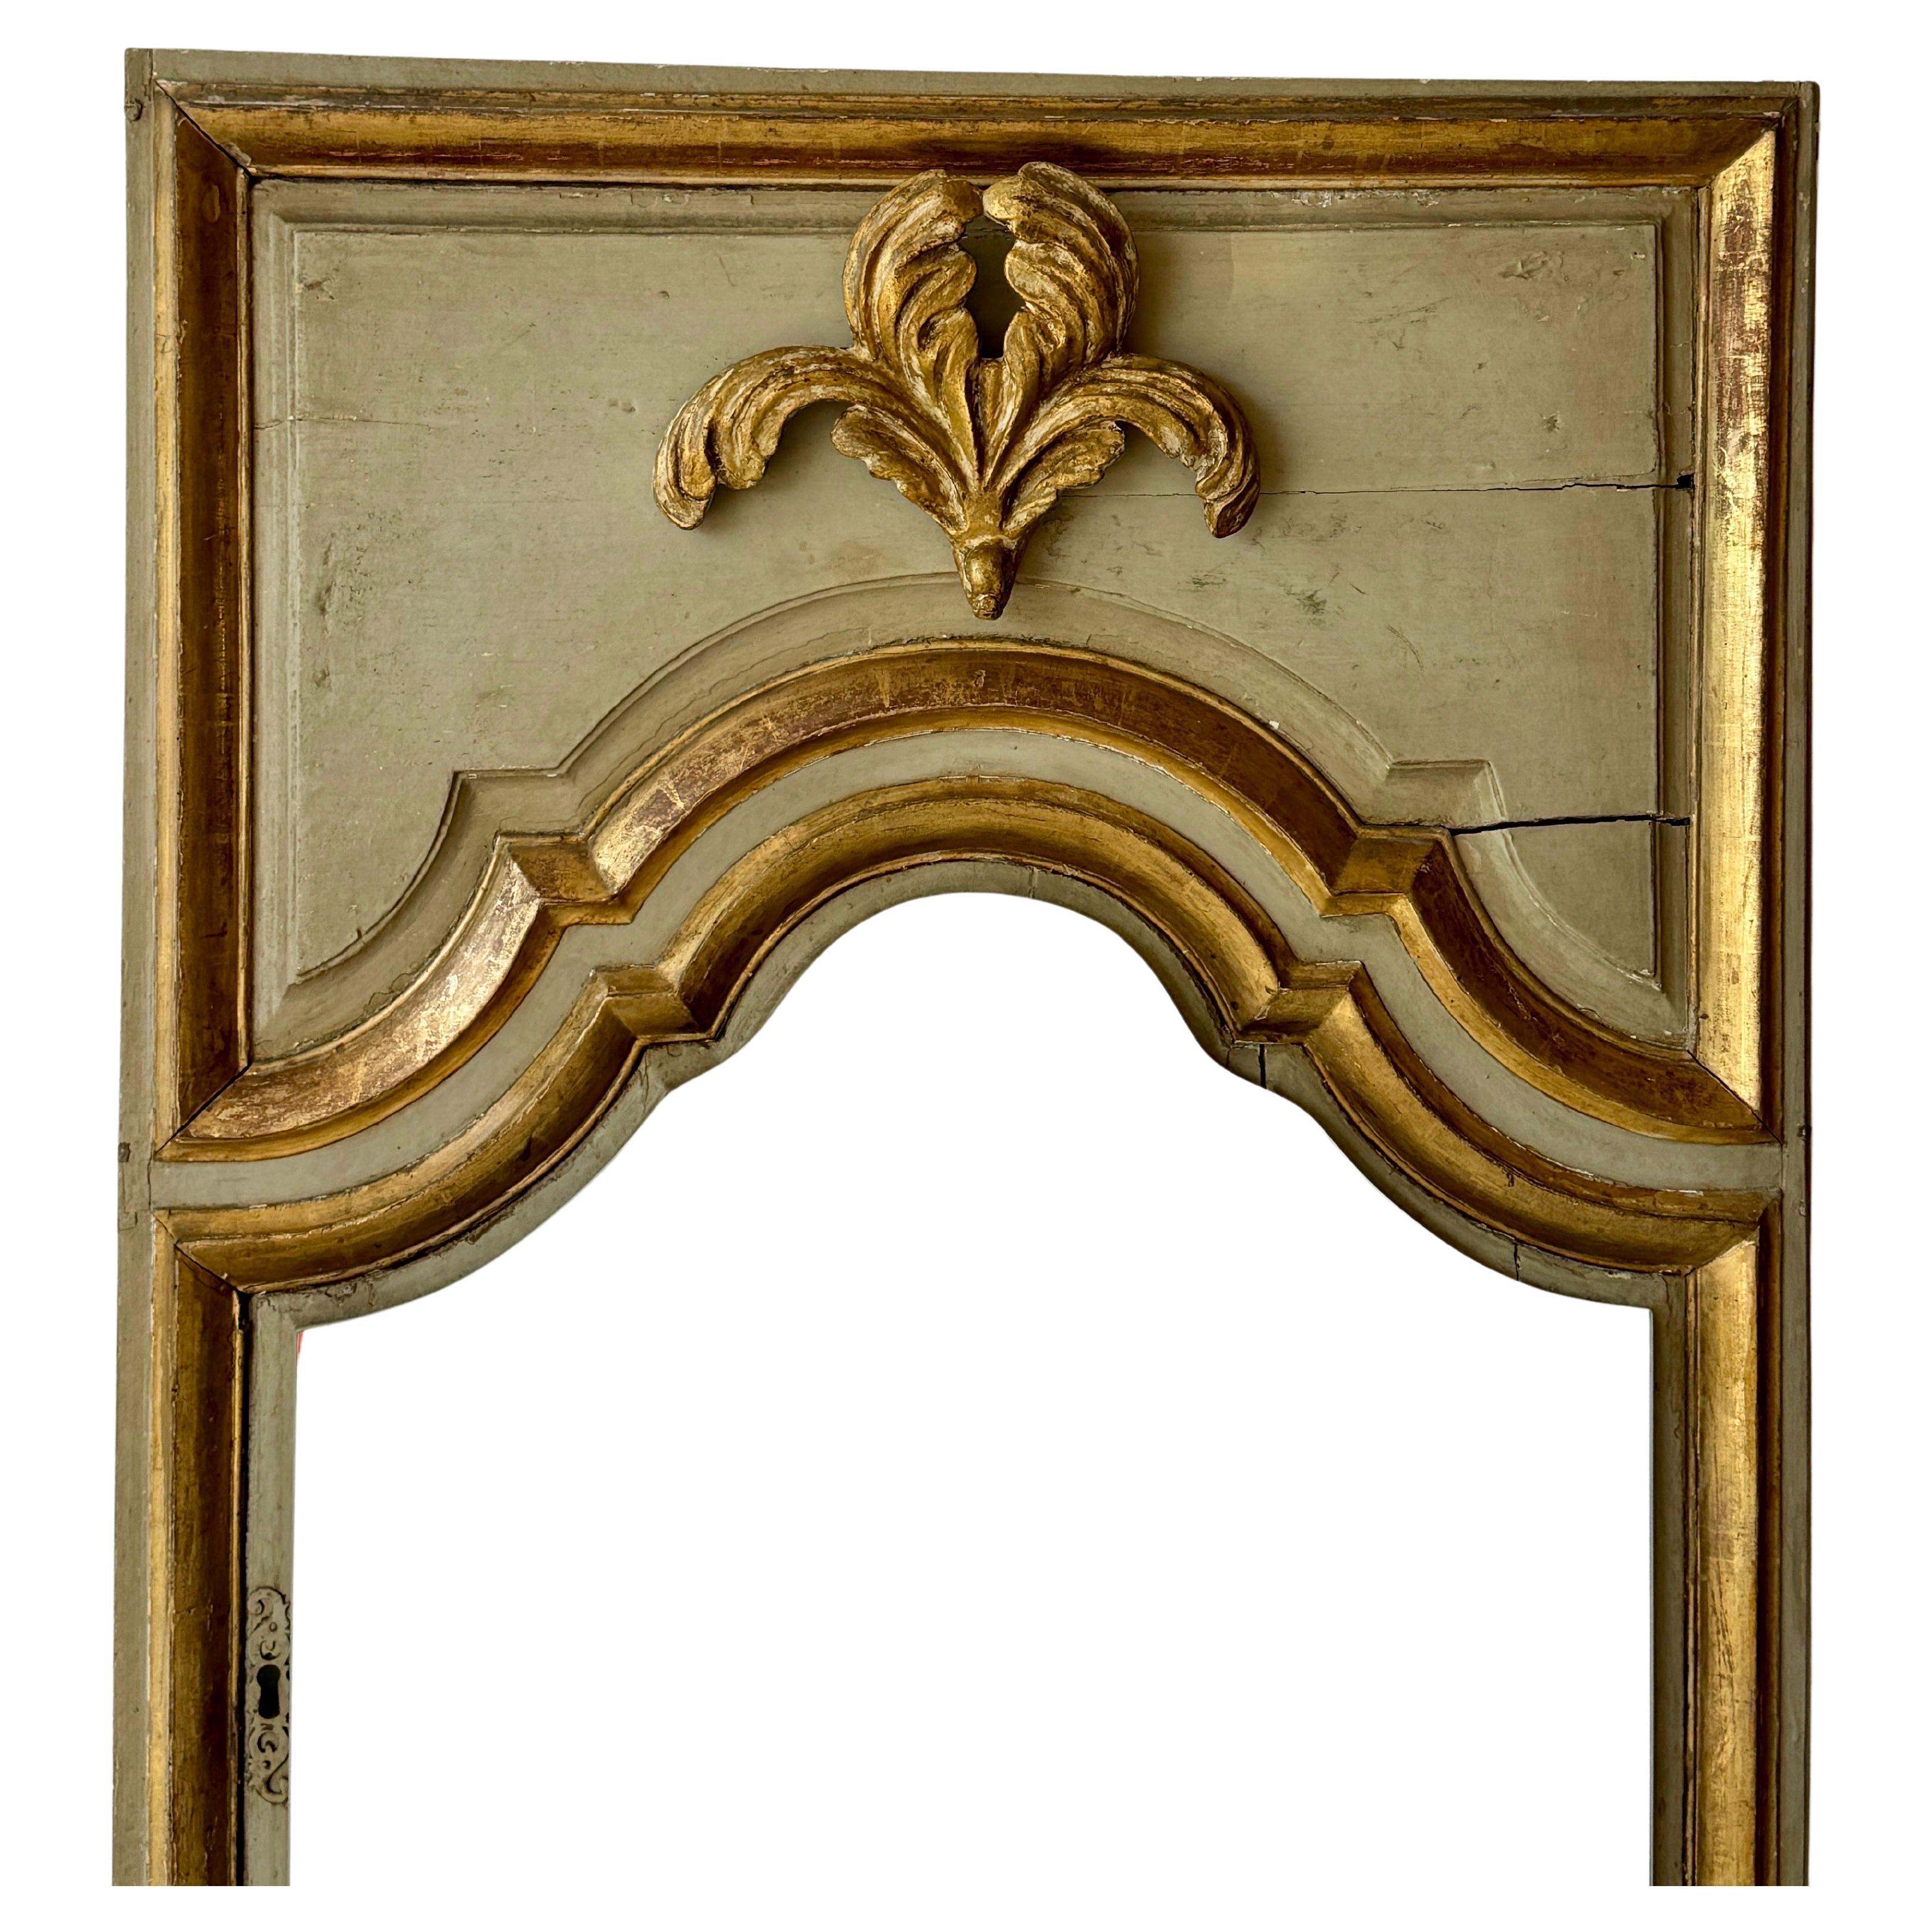 This large scale French armoire door was repurposed into a one of a kind floor mirror with mirror-glass being added at a later date. This charming wooden floor mirror with its original paint and gold gilding is a fantastic statement piece on when